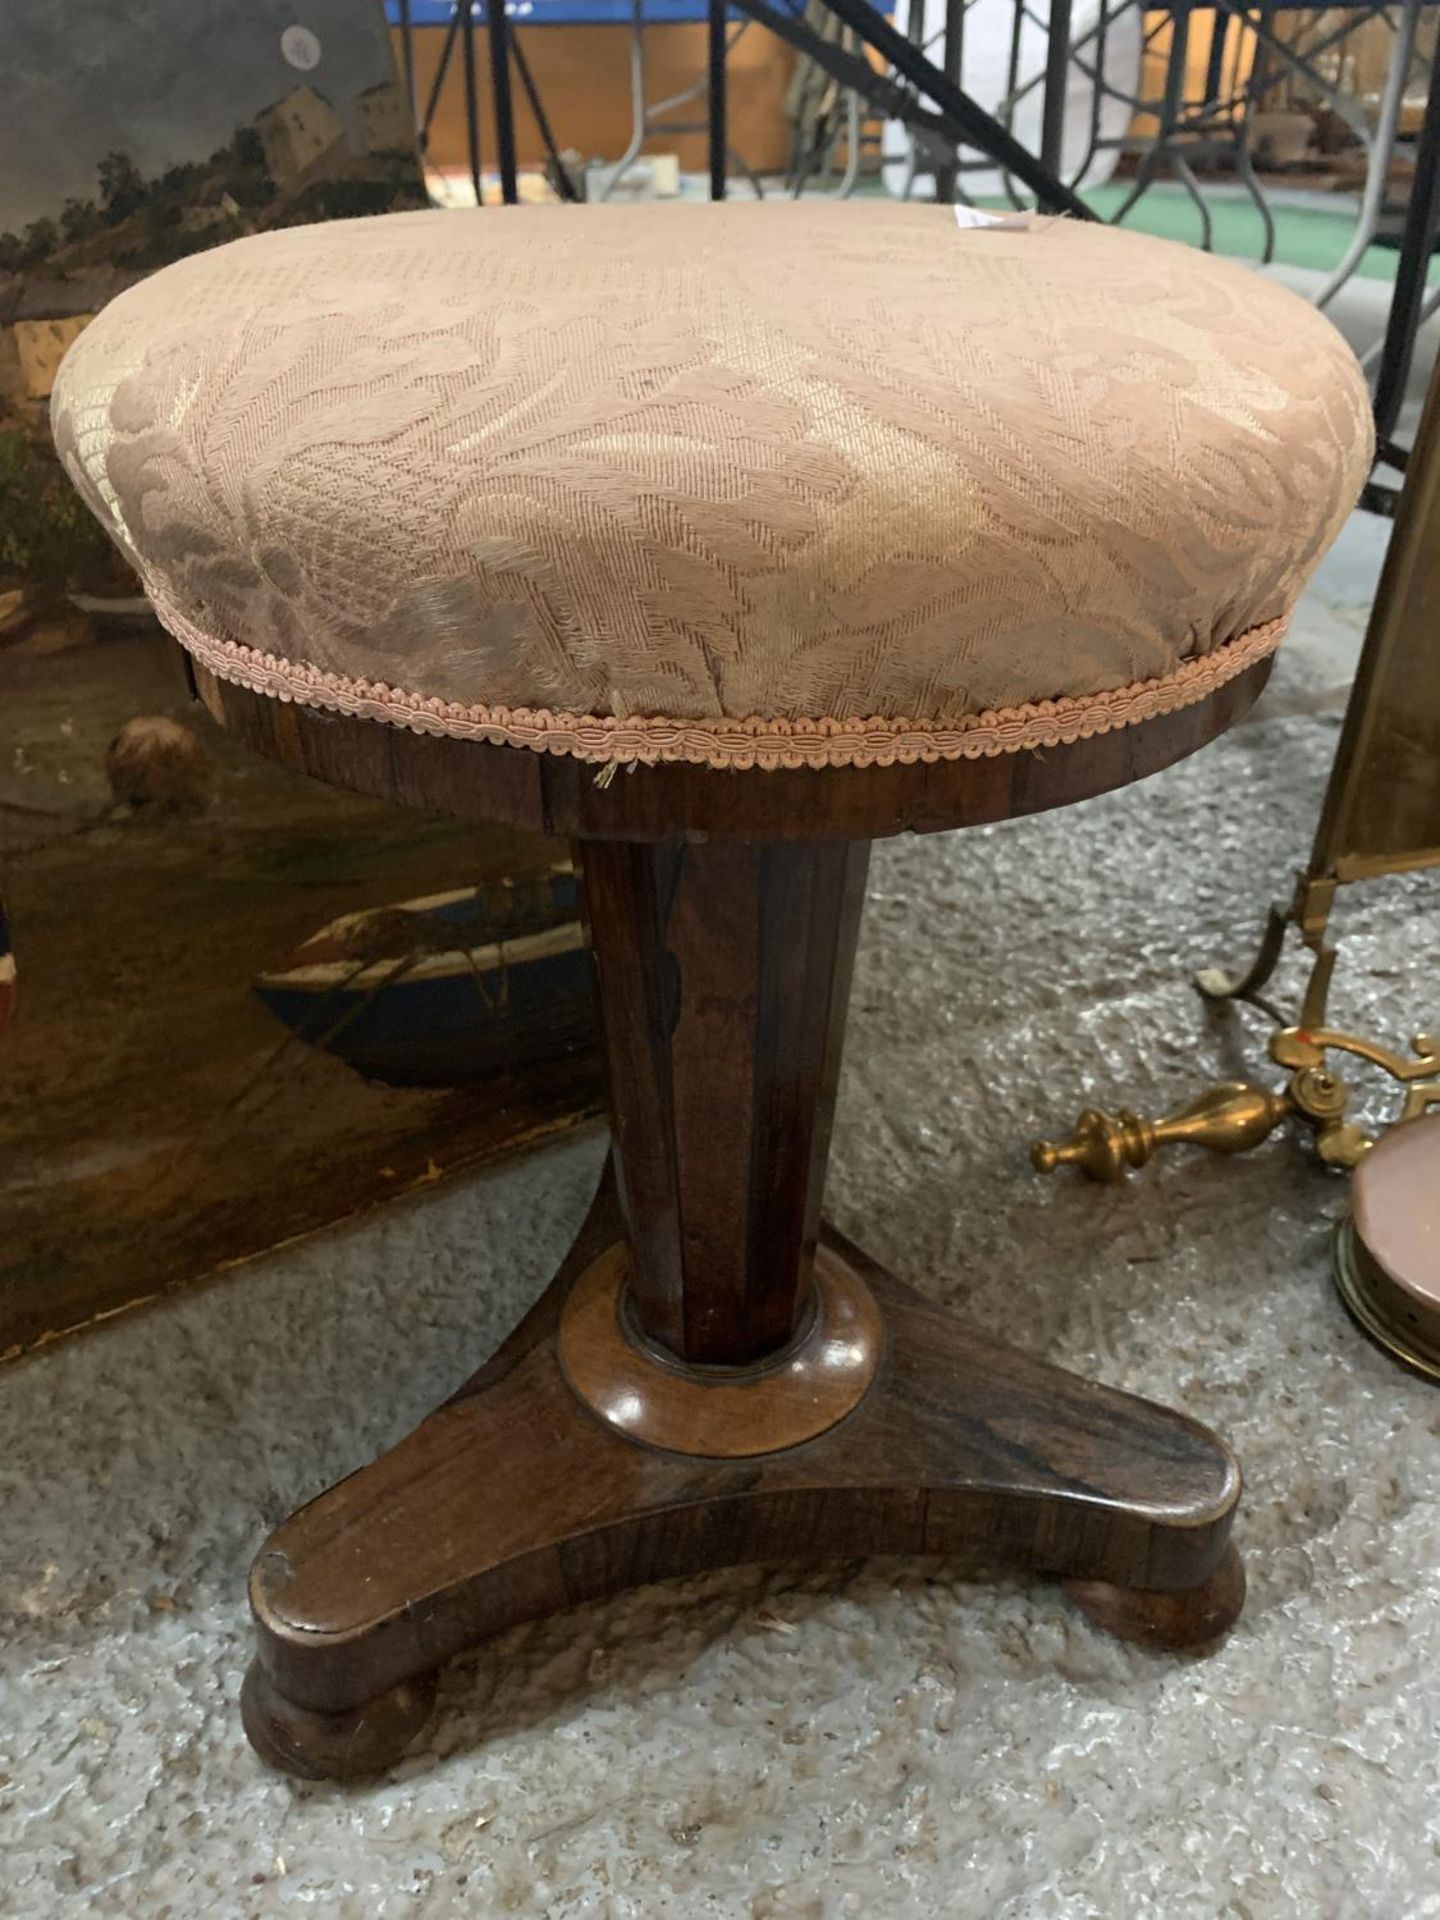 A VICTORIAN WALNUT ROTATING PIANO STOOL WITH AN UPHOLSTERED SEAT